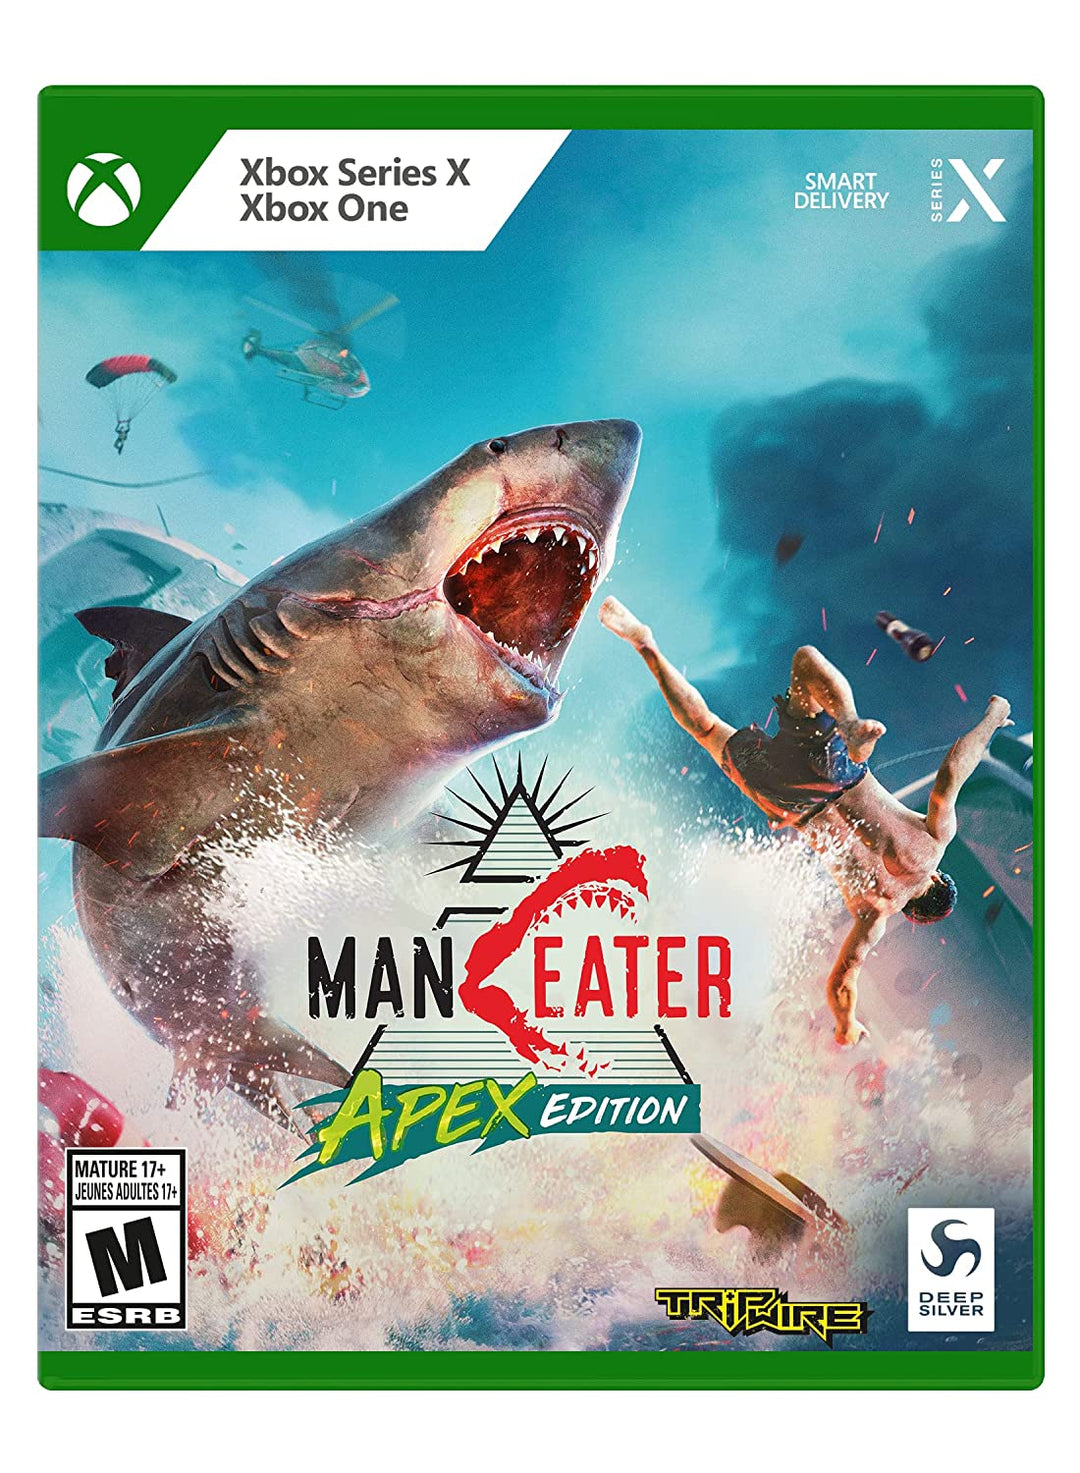 Maneater APEX Edition for Xbox One & Xbox Series X